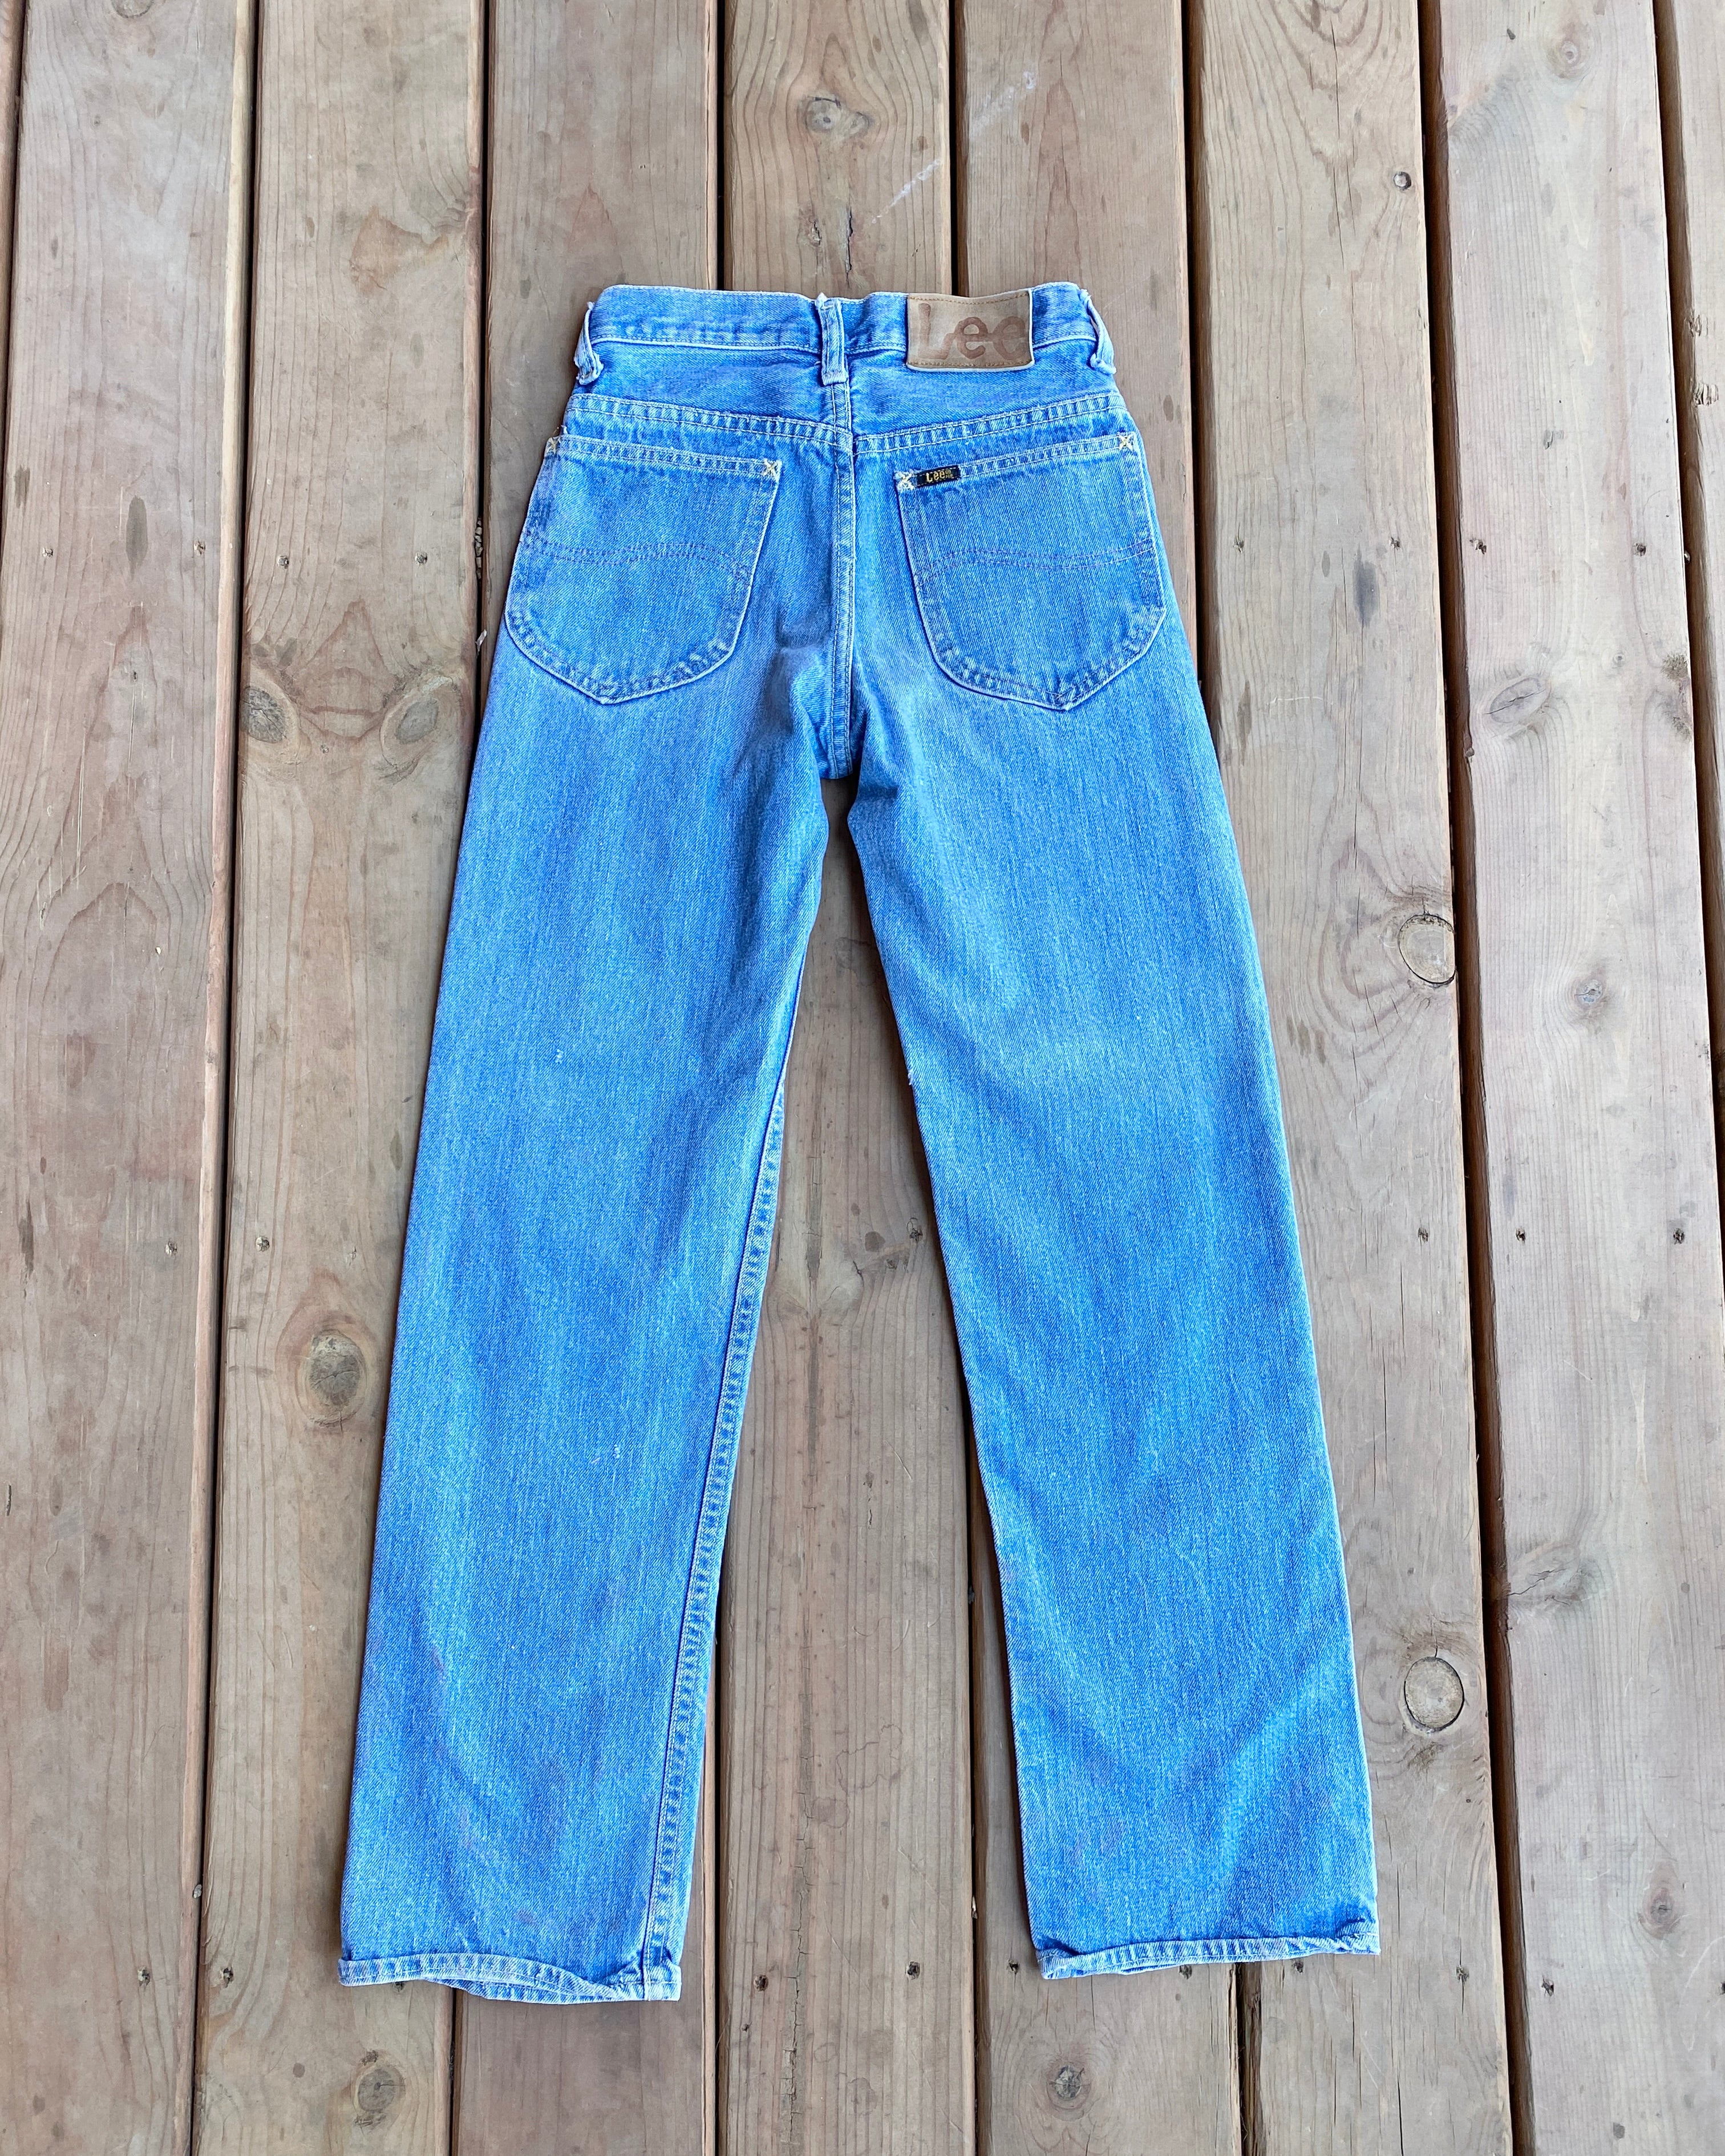 Vintage 1970s LEE RIDERS Medium Wash Distressed Jeans 24 Made in USA